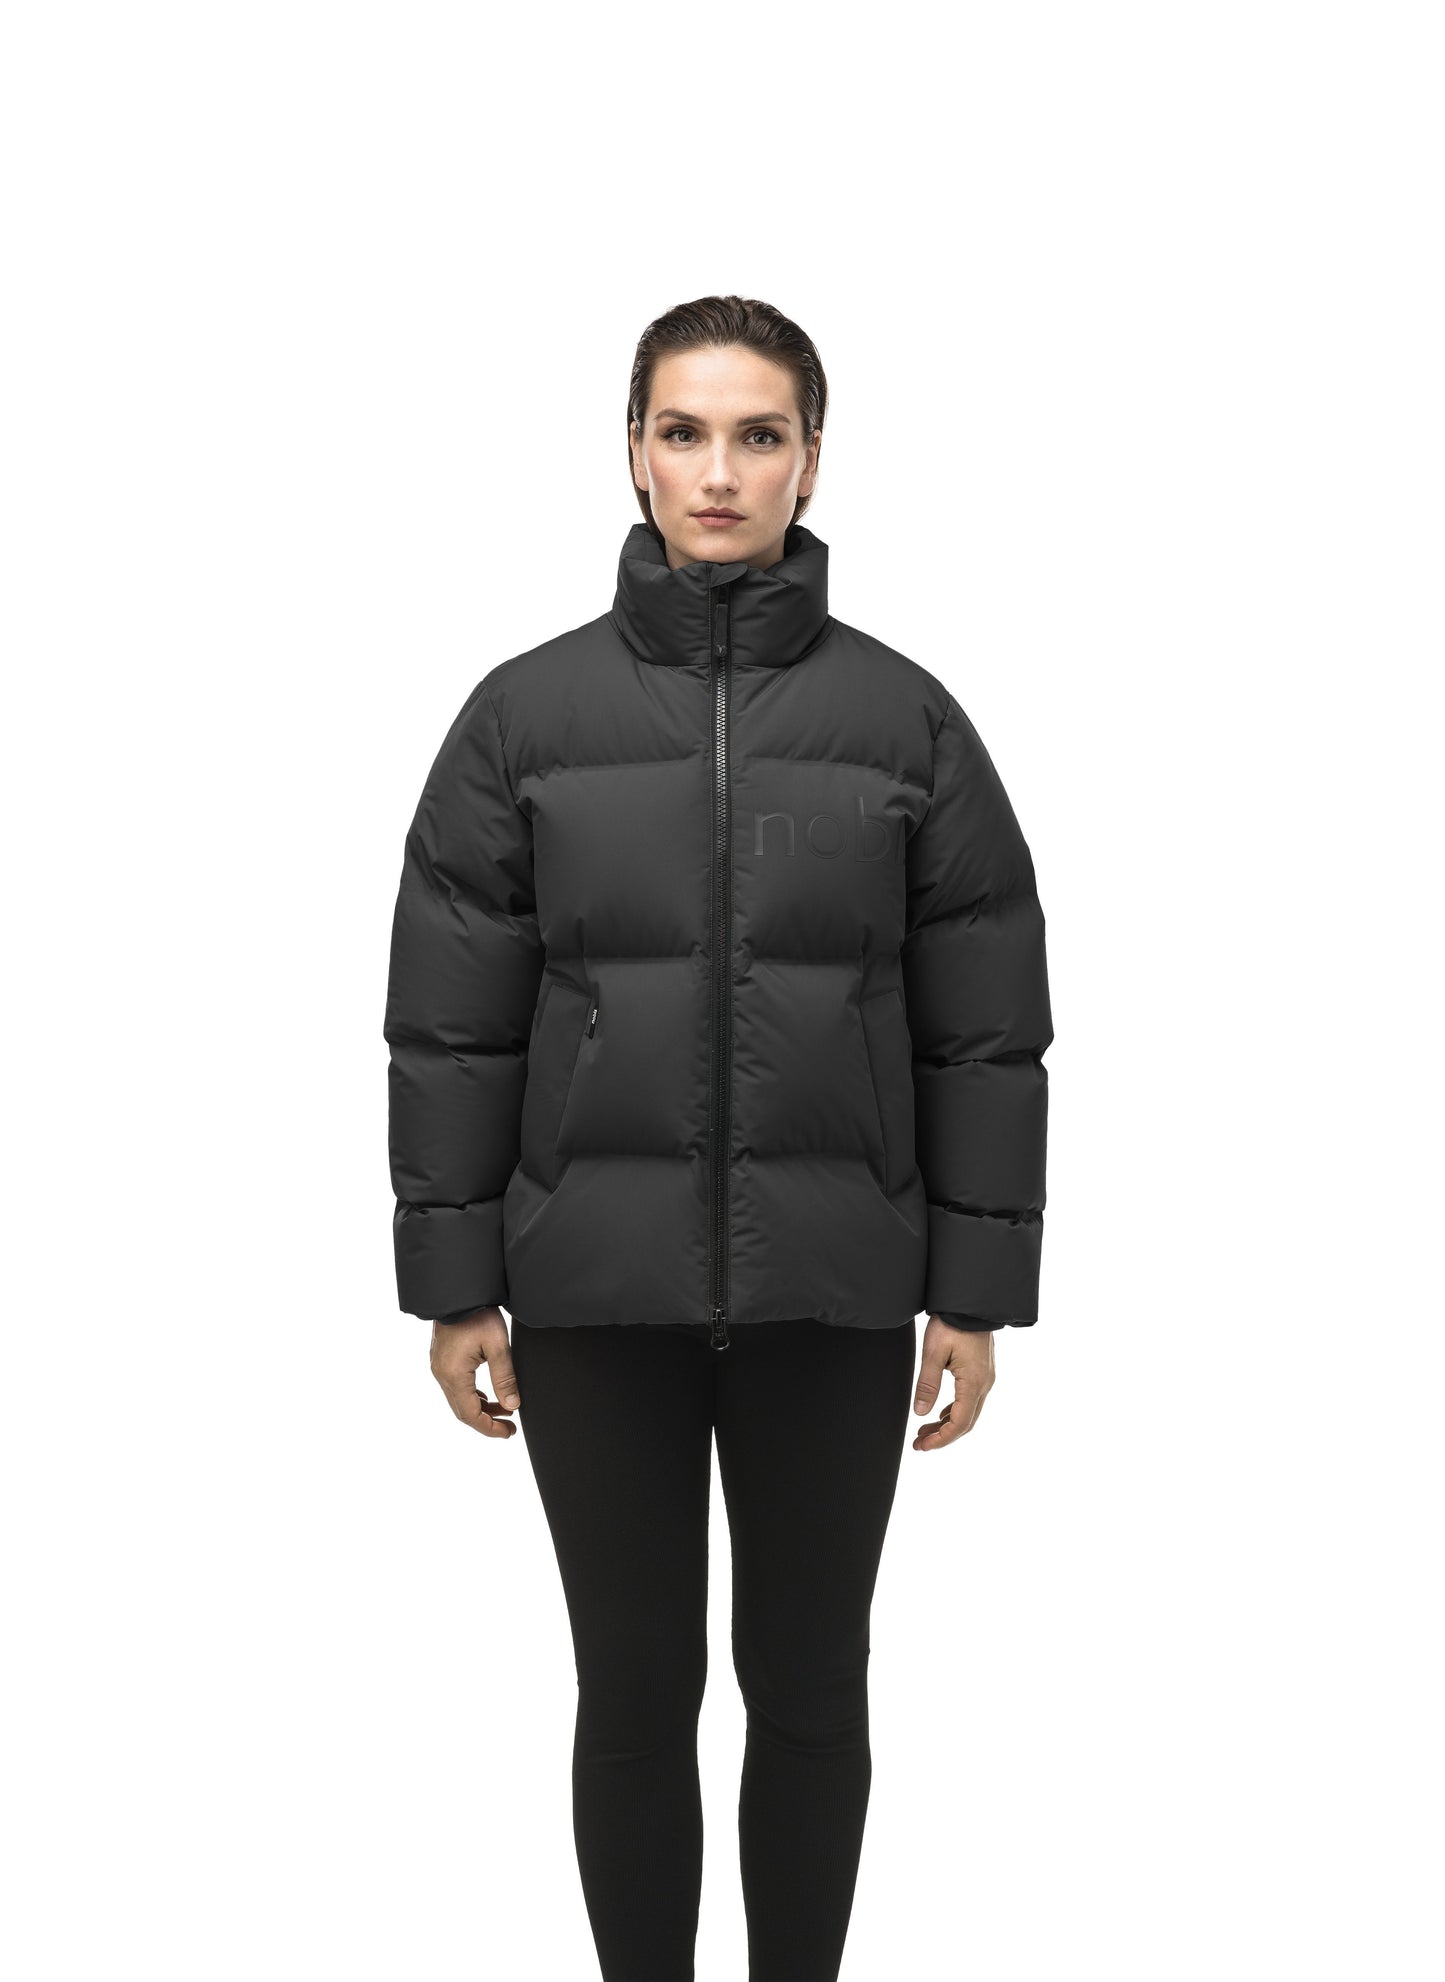 Women's puffer jacket with a minimalist modern design; featuring graphic details like oversized tonal branding, an exposed zipper, and seamless puffer channels to lock in the Premium Canadian Origin White Duck Down in Black